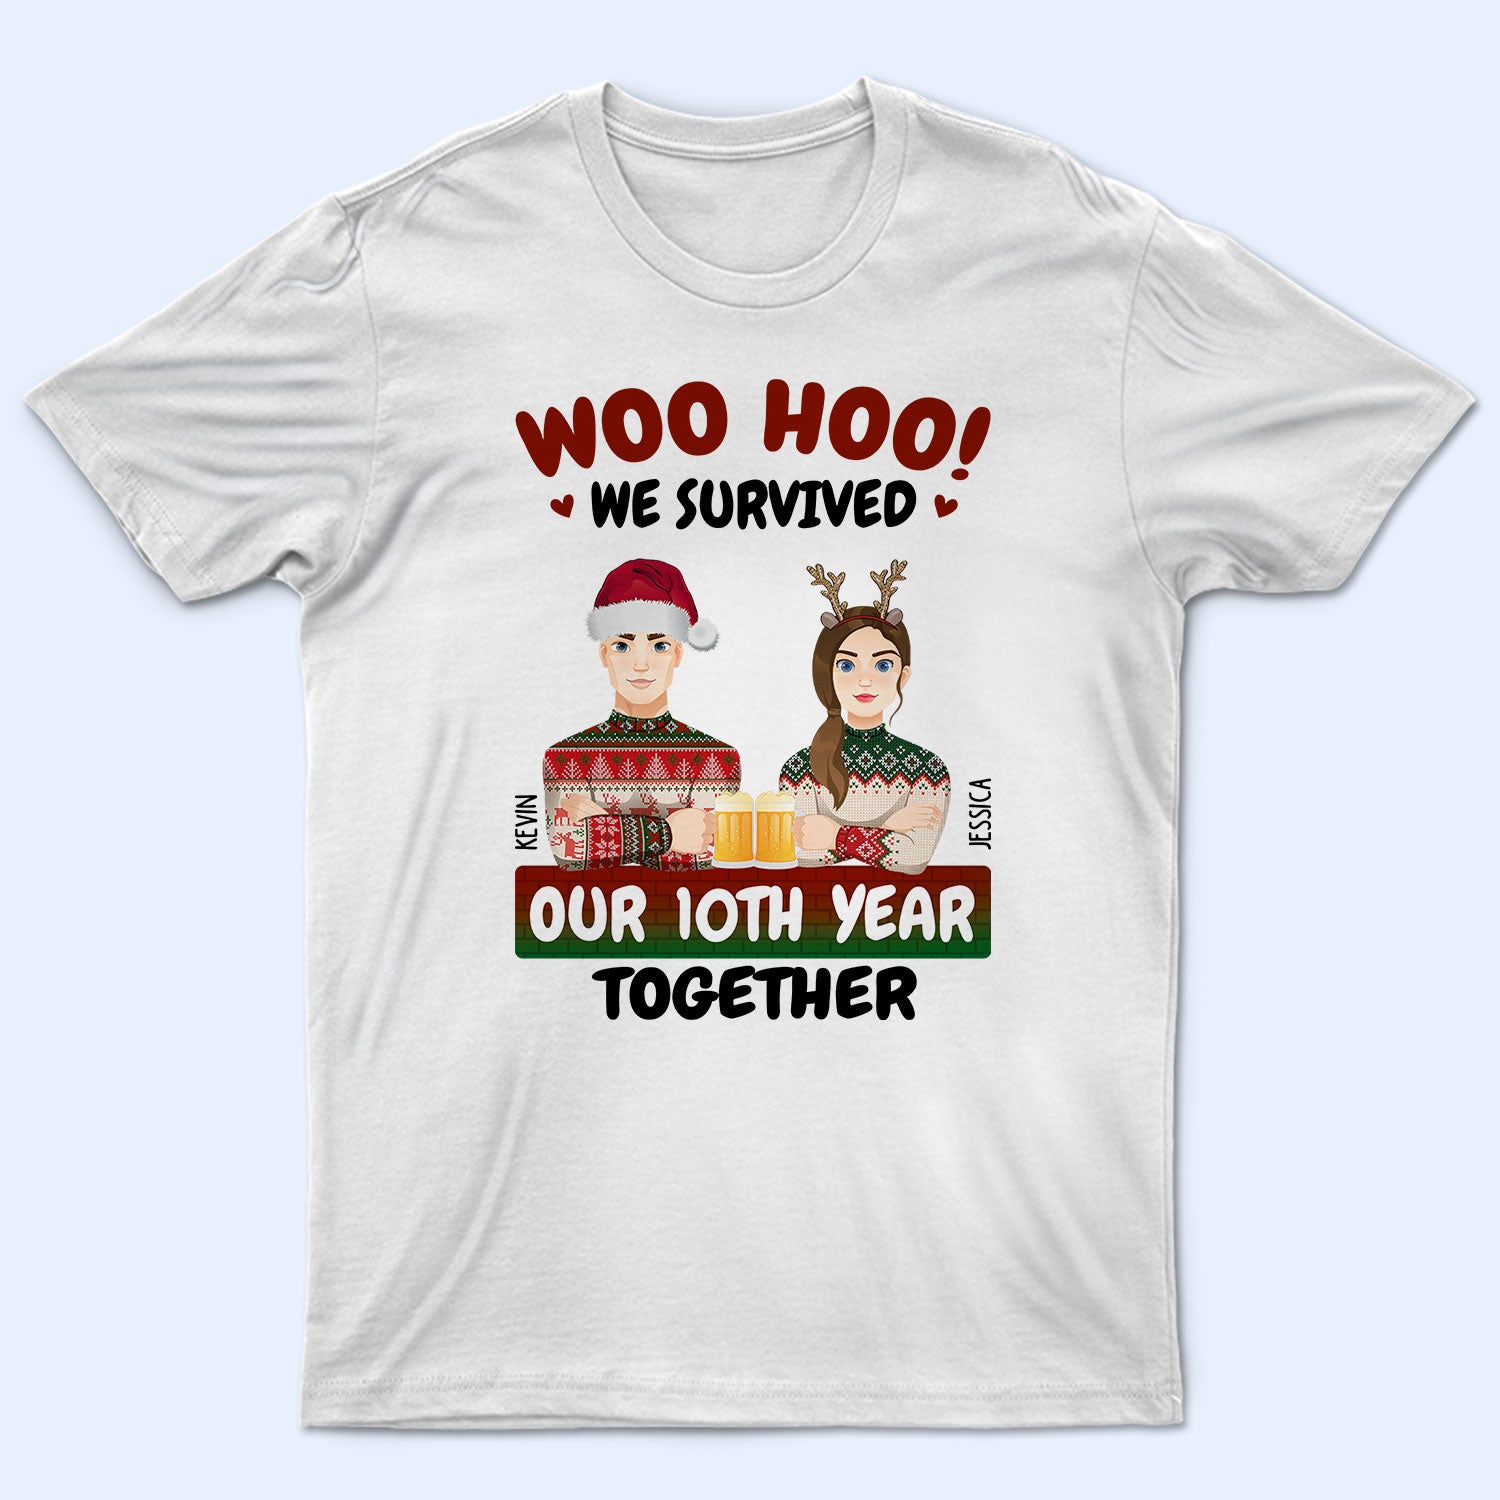 Woo Hoo We Survived - Christmas Gift For Couples - Personalized T Shirt